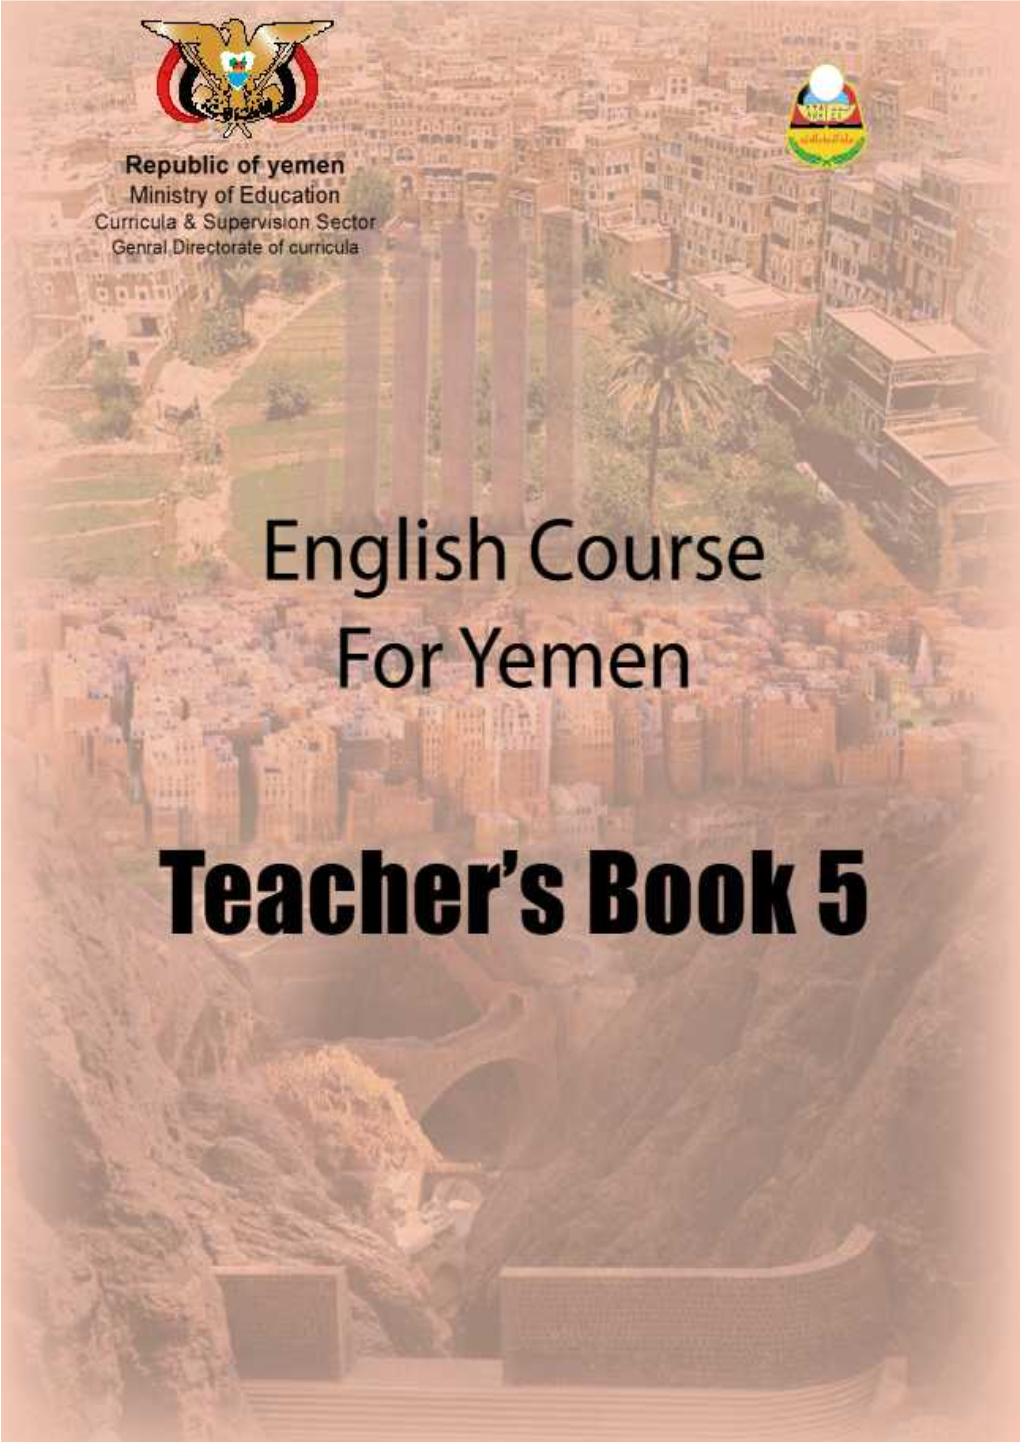 Teacher's Book 5 Introduction Page Crescent English Course - the Background